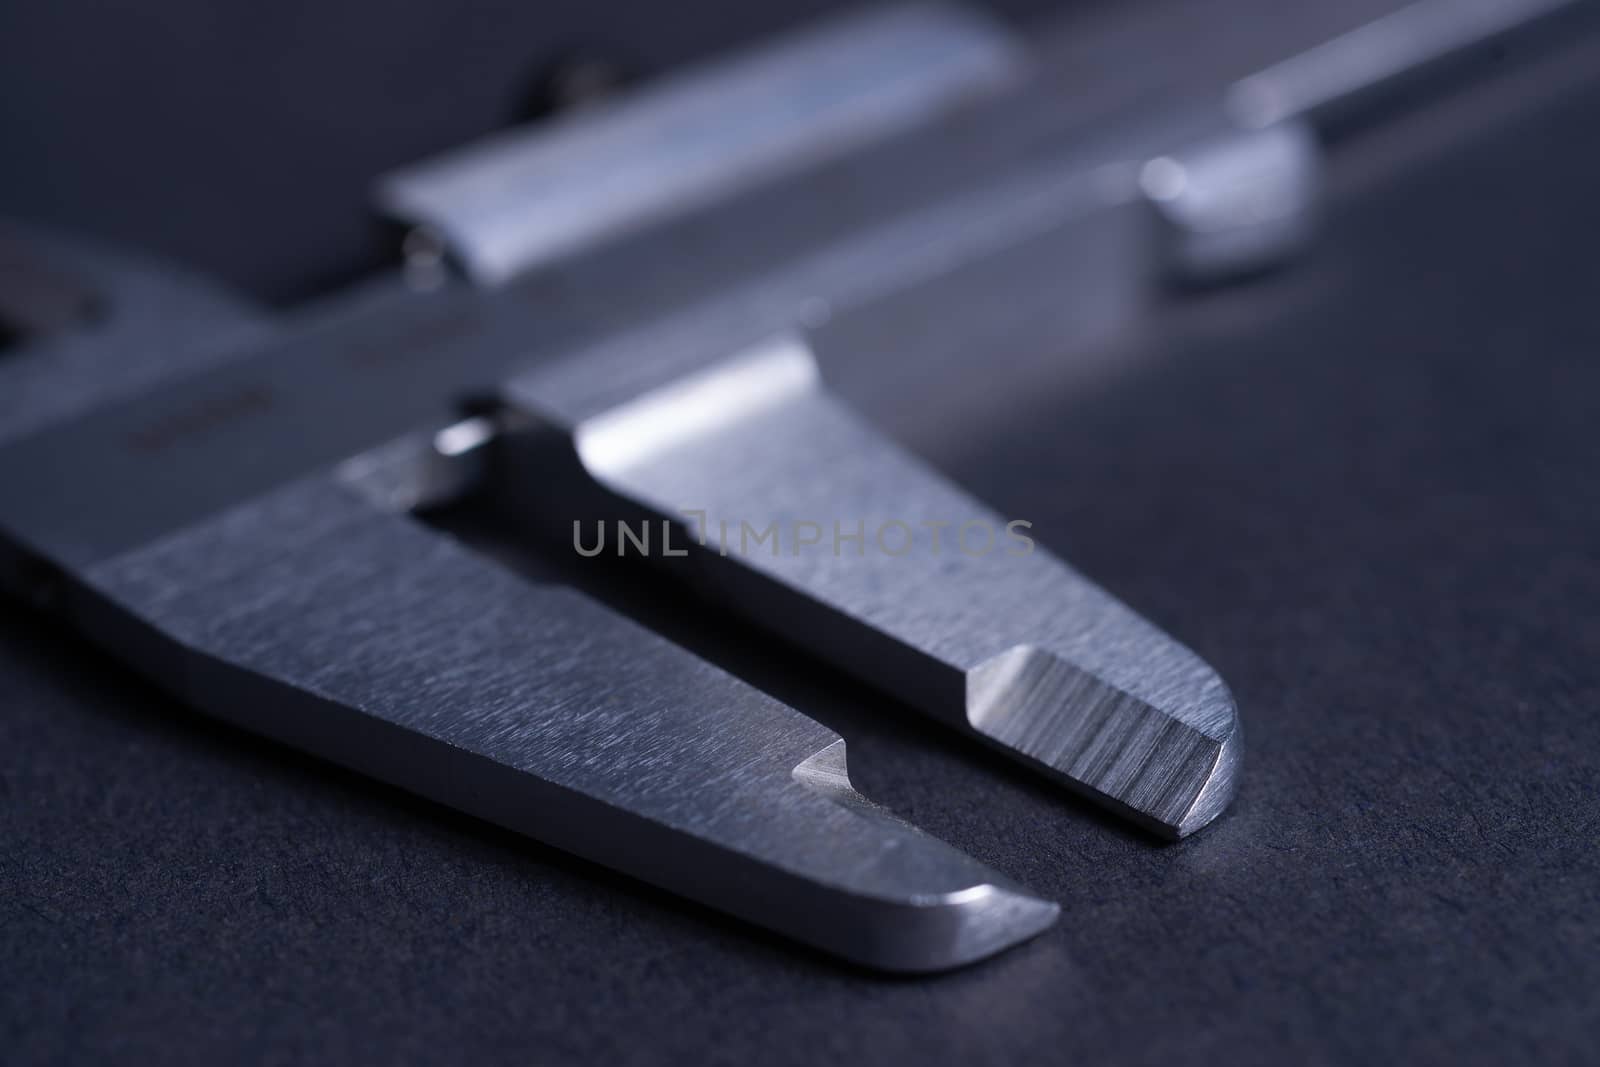 Vintage steel caliper tool closeup. Caliper tips in focus. Tool in very good condition. Scale in metric units, milimeter step. Stock photo on blurred gray background. by alexsdriver